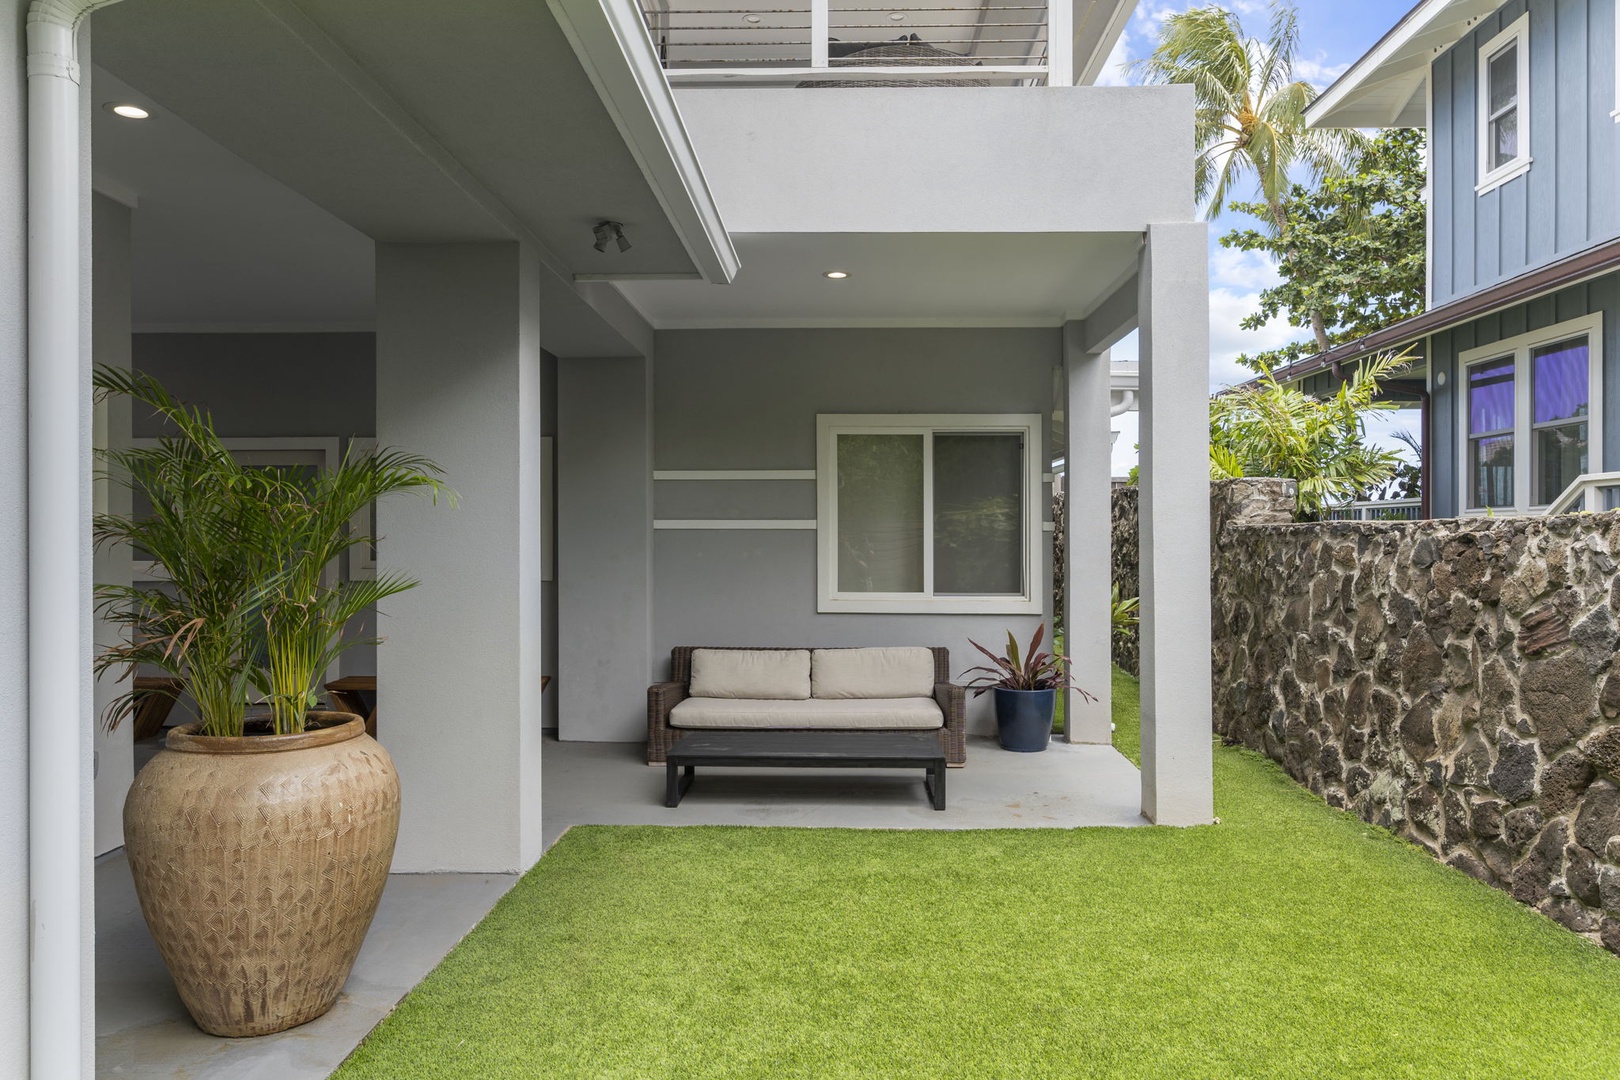 Haleiwa Vacation Rentals, Hale Nalu - Sit back and relax in the privacy of your own backyard